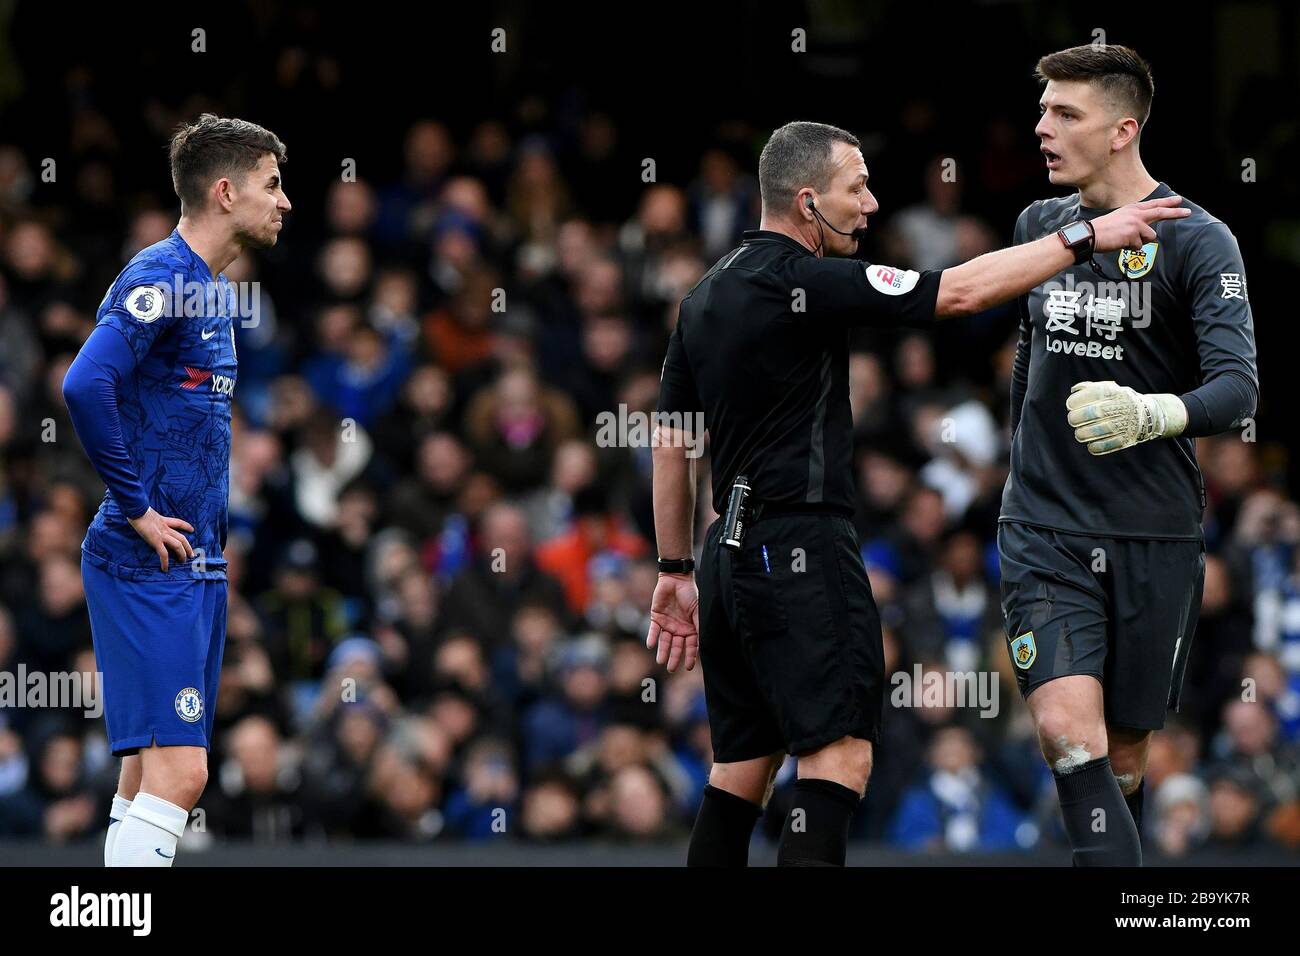 Jorginho of Chelsea prepares to take a penalty as Referee, Kevin Friend orders Nick Pope of Burnley back to the goal   - Chelsea v Burnley, Premier League, Stamford Bridge, London, UK - 11th January 2020  Editorial Use Only - DataCo restrictions apply Stock Photo